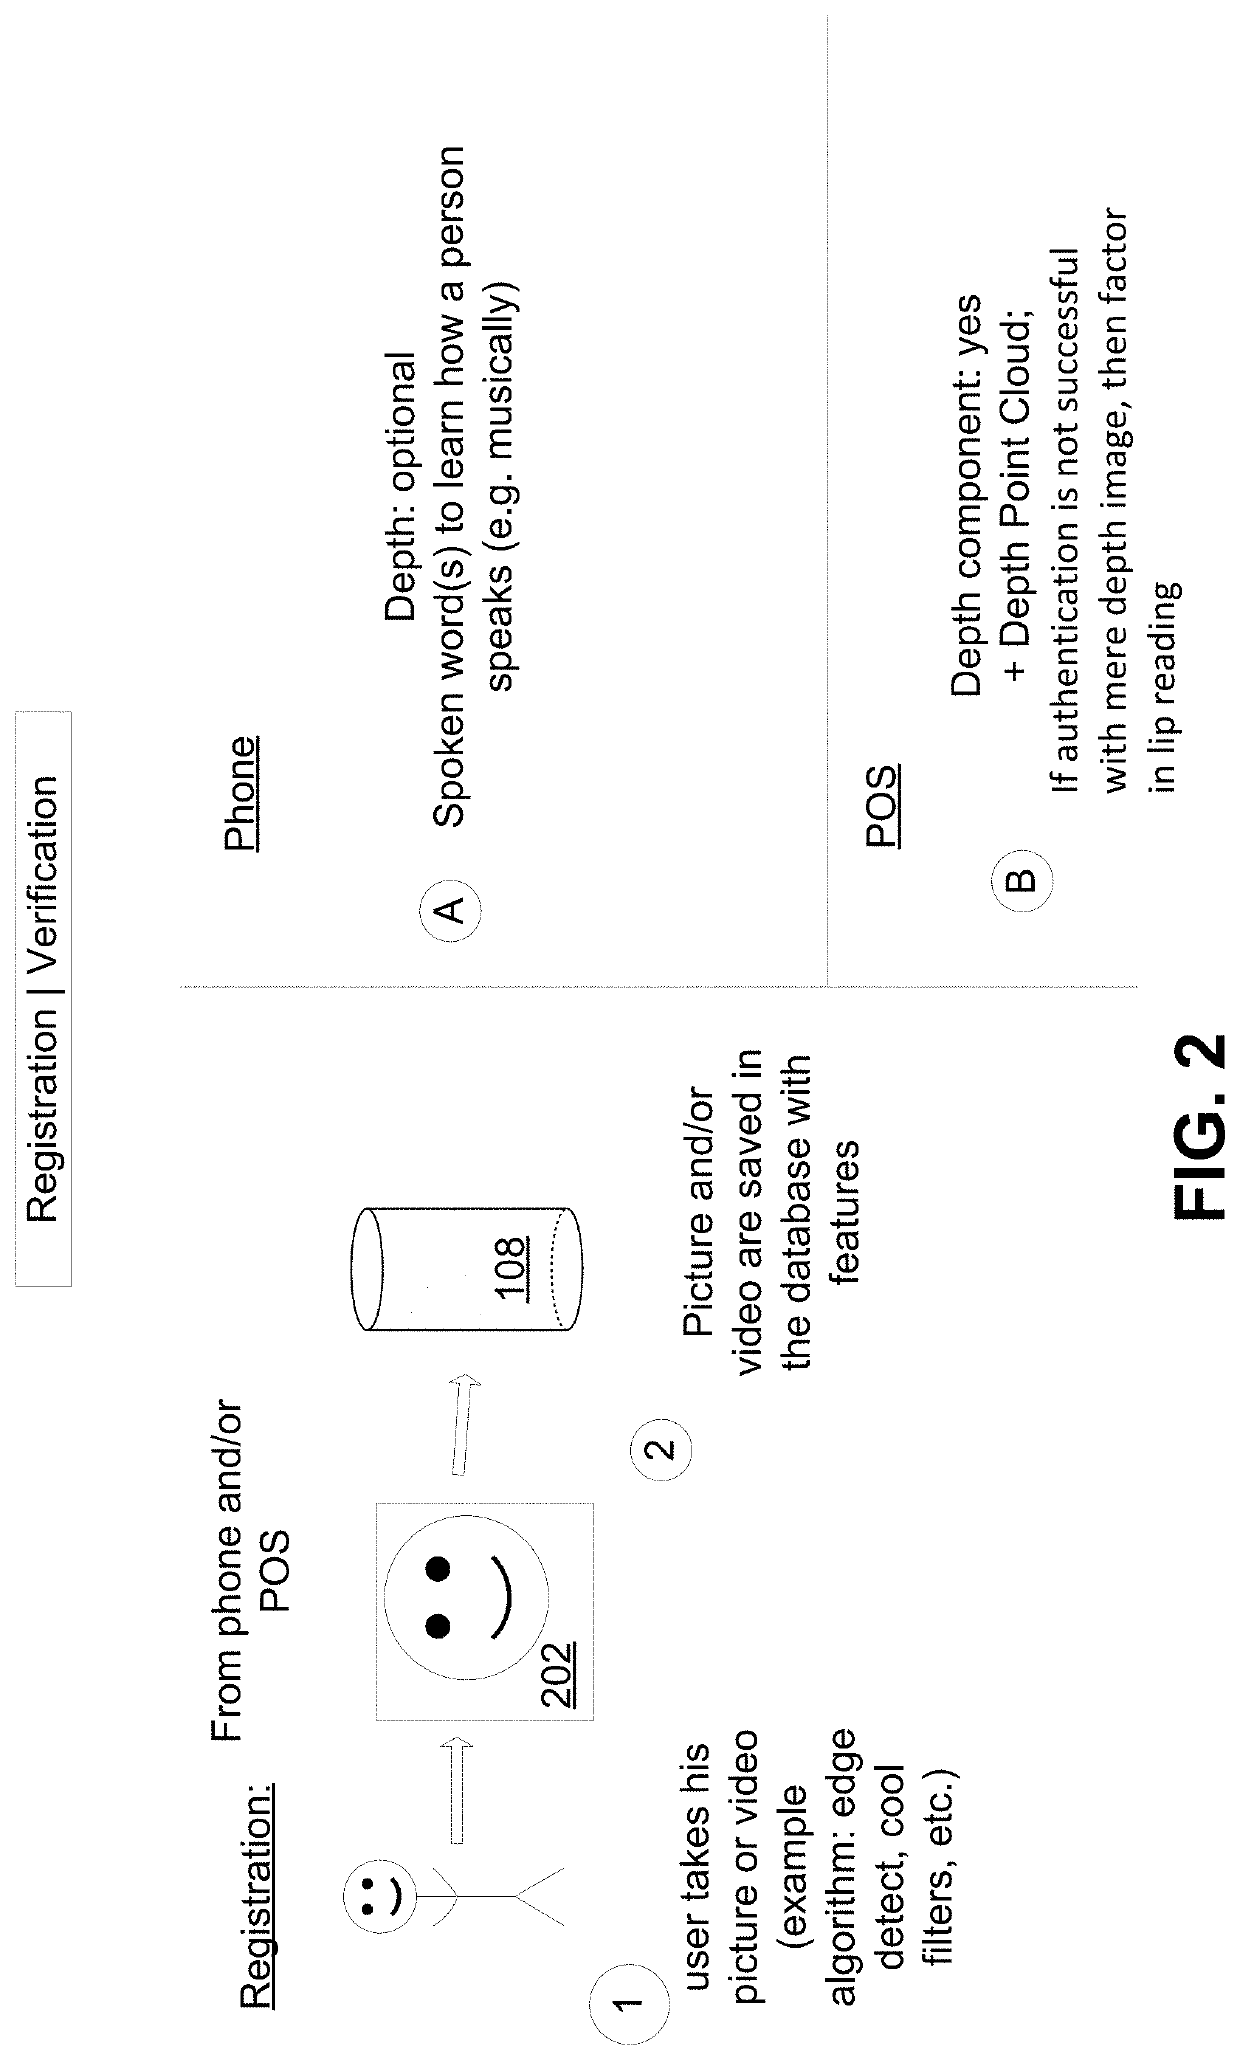 Systems and methods for secure tokenized credentials